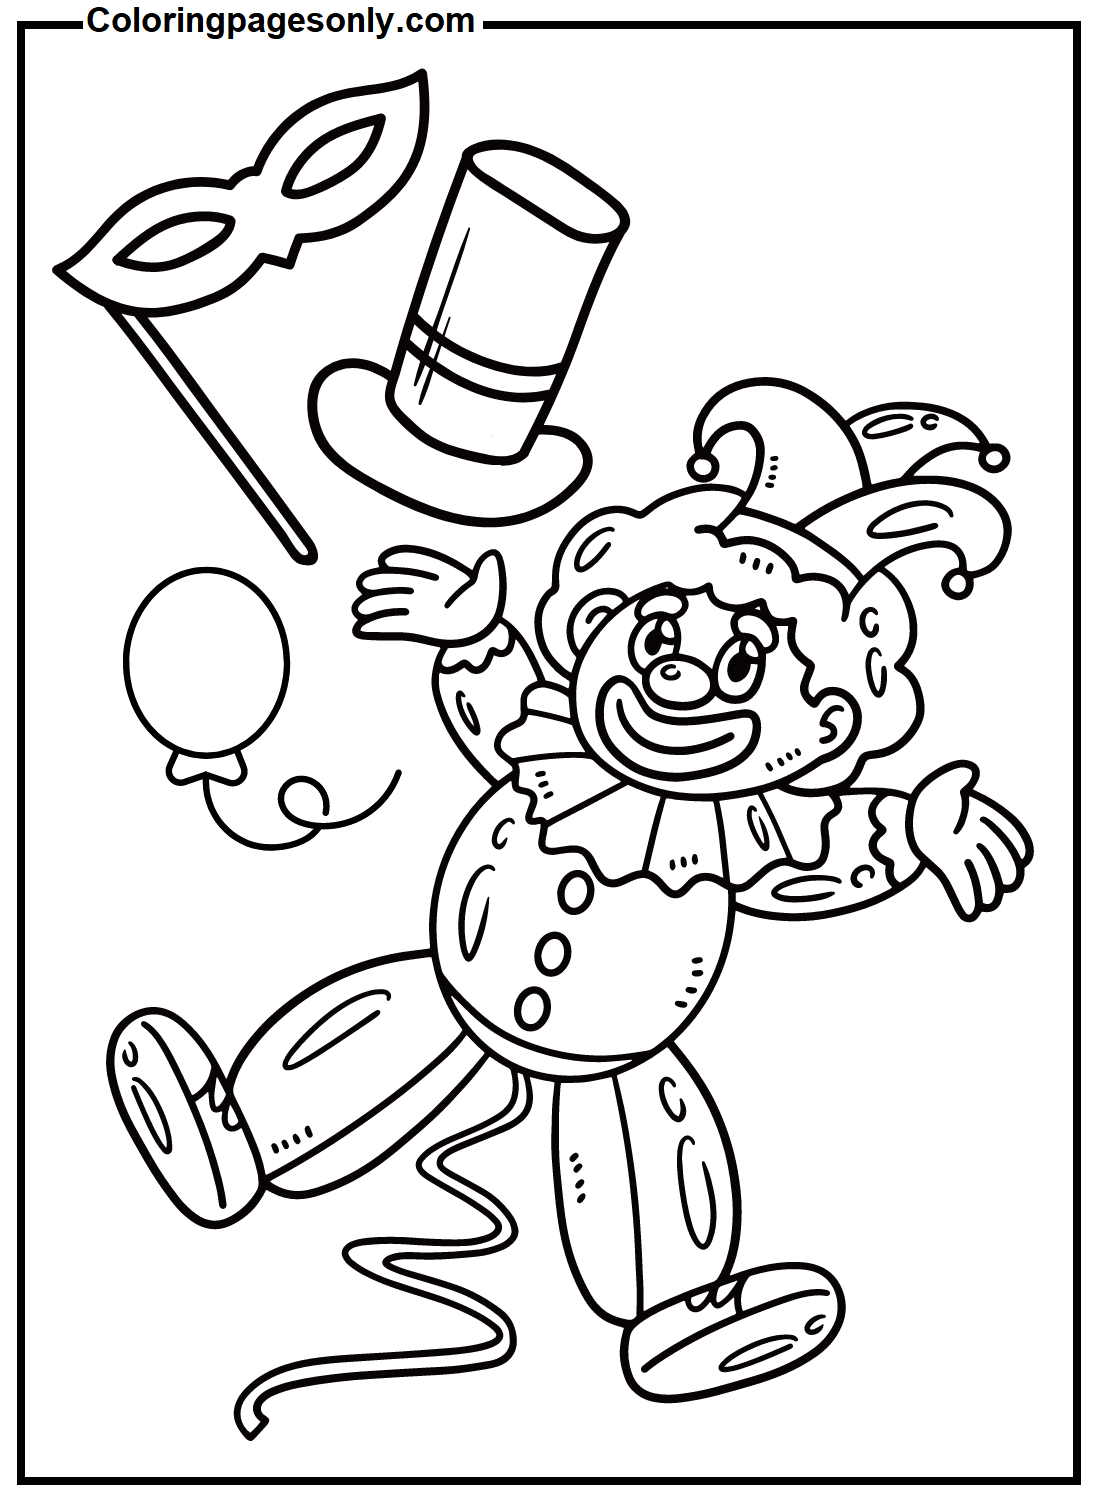 Happy Mardi Gras With Jester Boy Coloring Pages